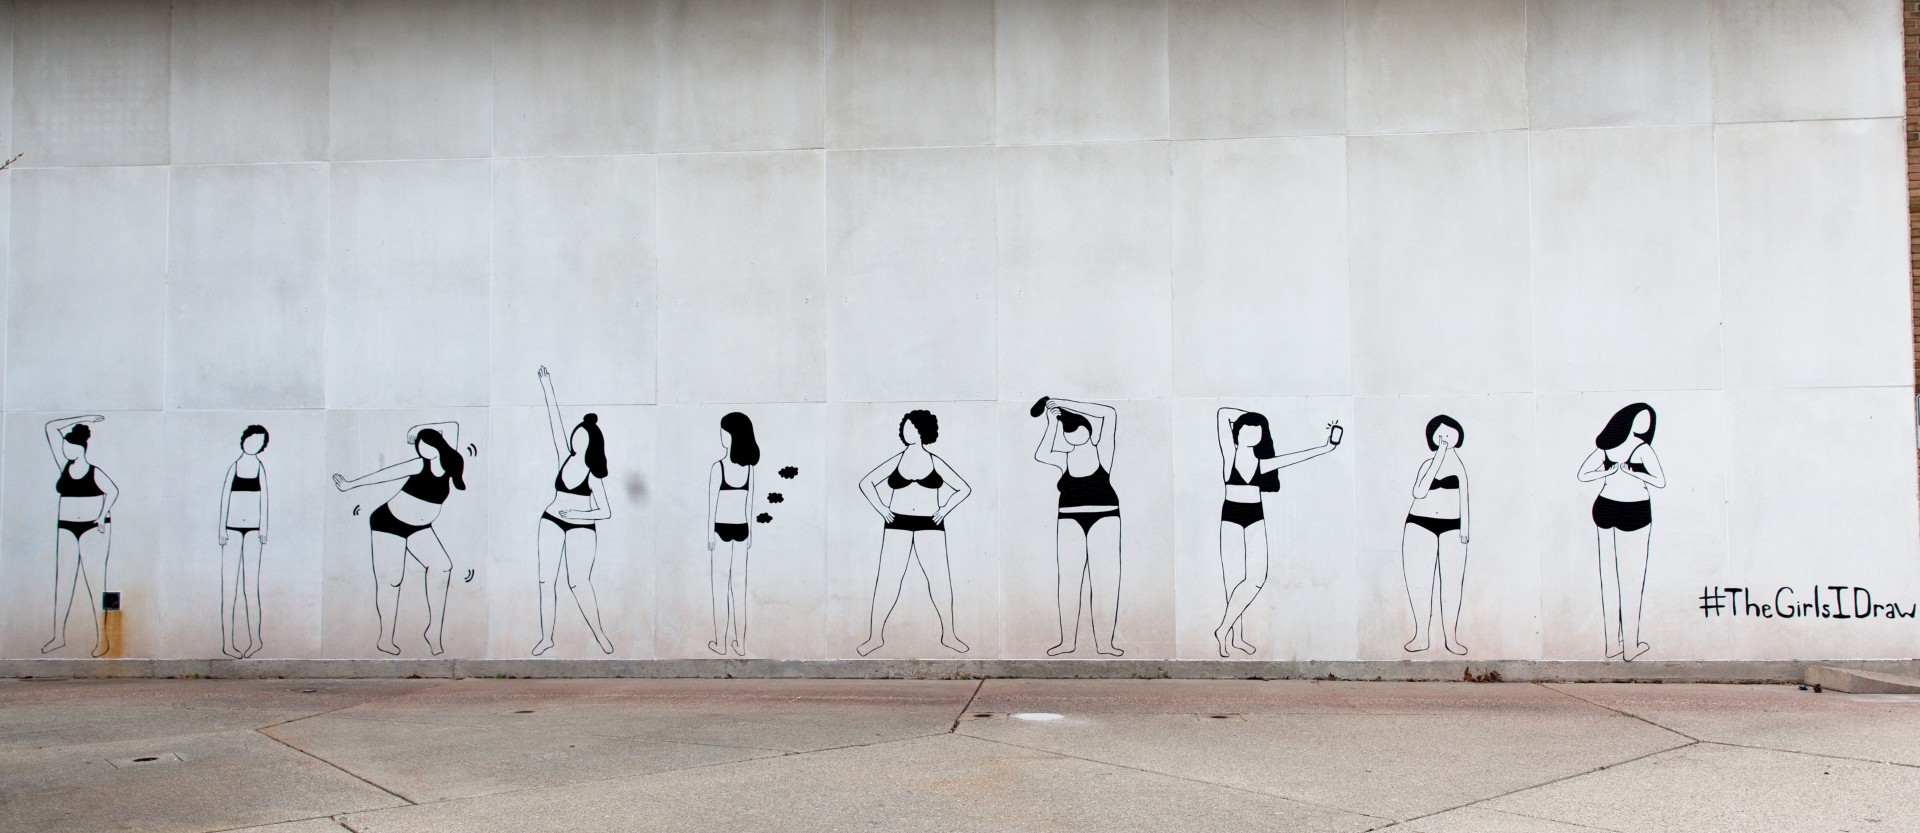 Photograph of wall with mural. Mural consists of 10 women in undergarments in various poses. Women are all rendered in black lines made out of duct tape. 